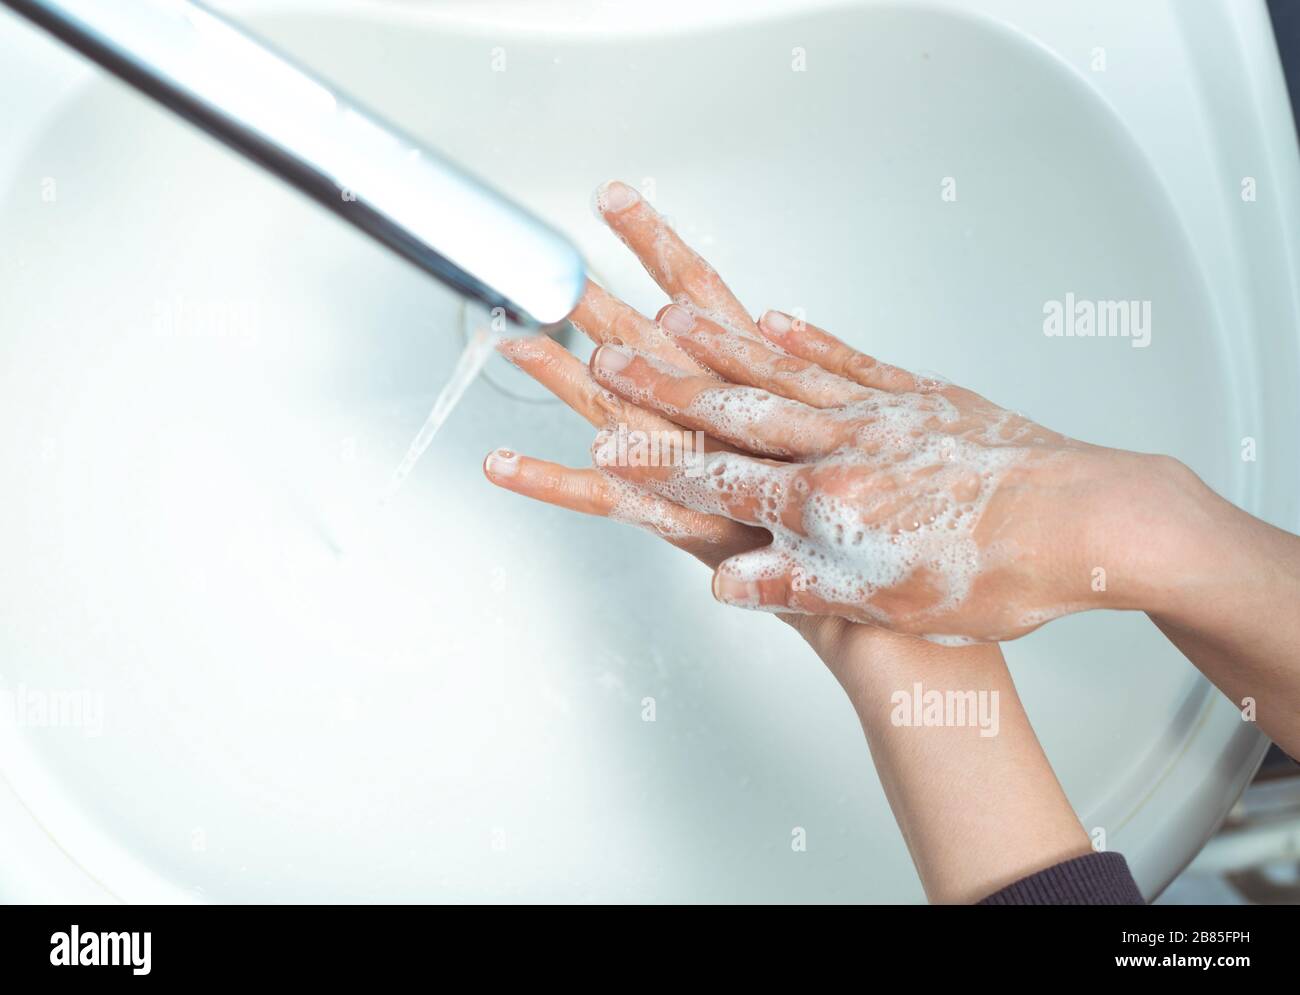 Hand washing with soap under water. Stock Photo